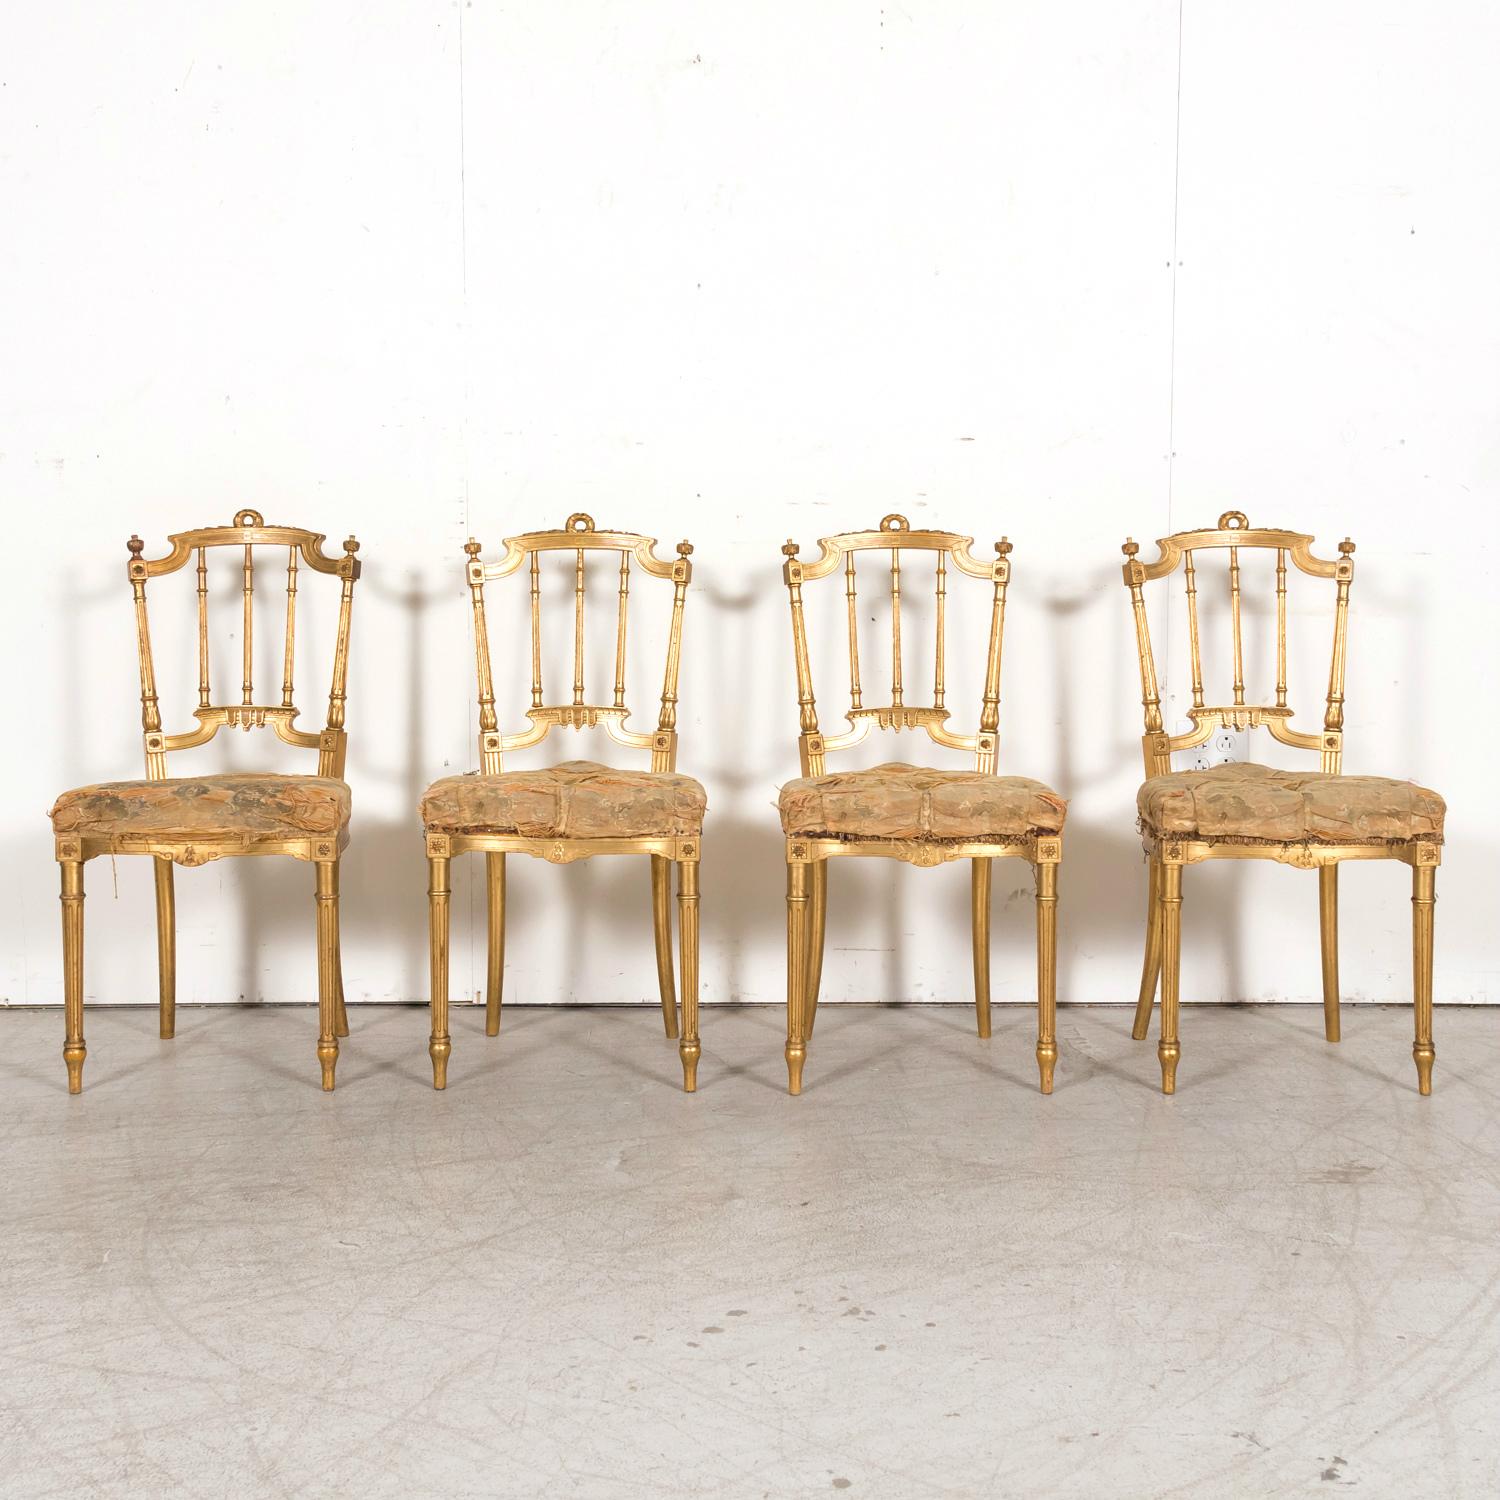 Four 19th century French Louis XVI style gilded opera chairs with tufted seats, handcrafted in Paris, circa 1860s. Red oxidation showing through the beautiful water gilded patina that is original to the chairs. Typically used at the opera, they are